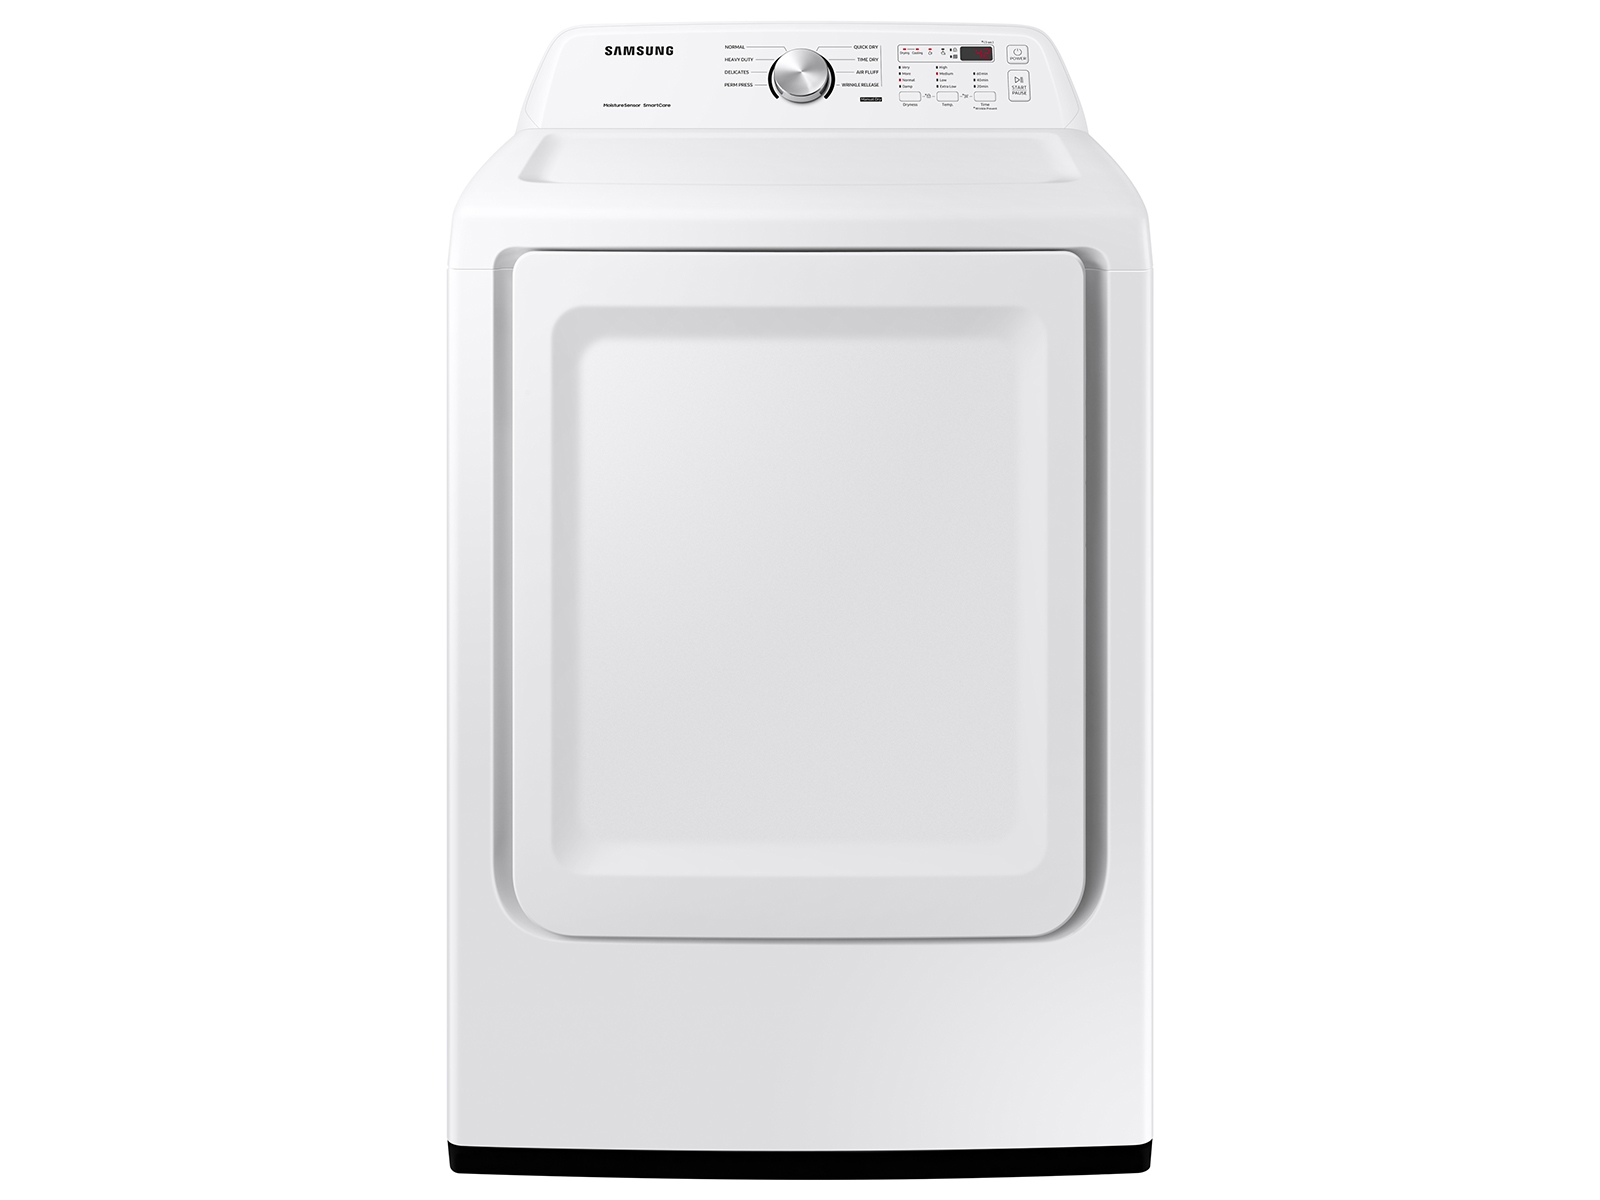 Samsung 7.2 cu. ft. Electric Dryer with Sensor Dry in White(DVE45T3200W/A3)